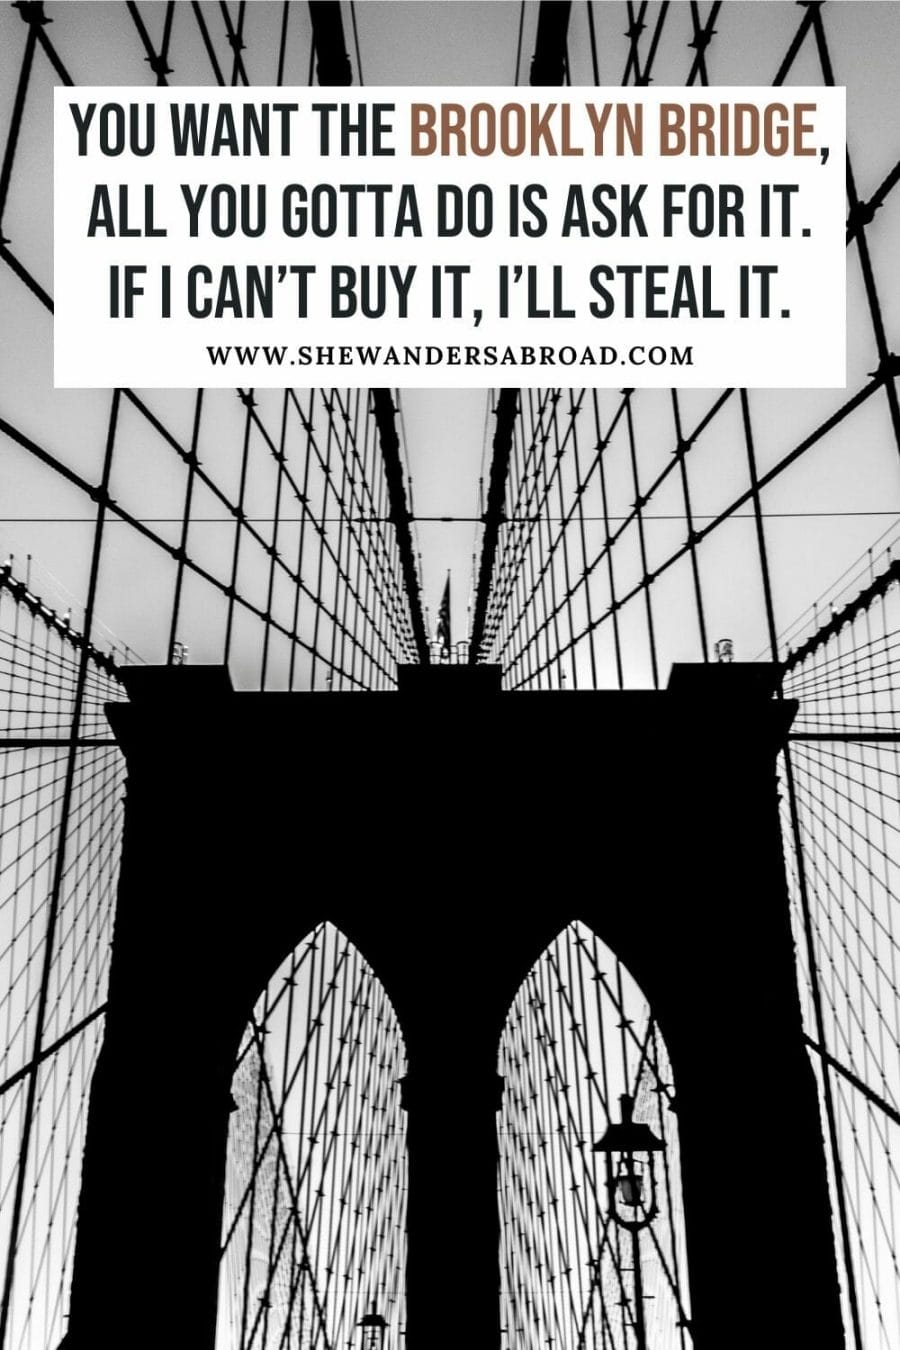 Famous Brooklyn Bridge Quotes for Instagram